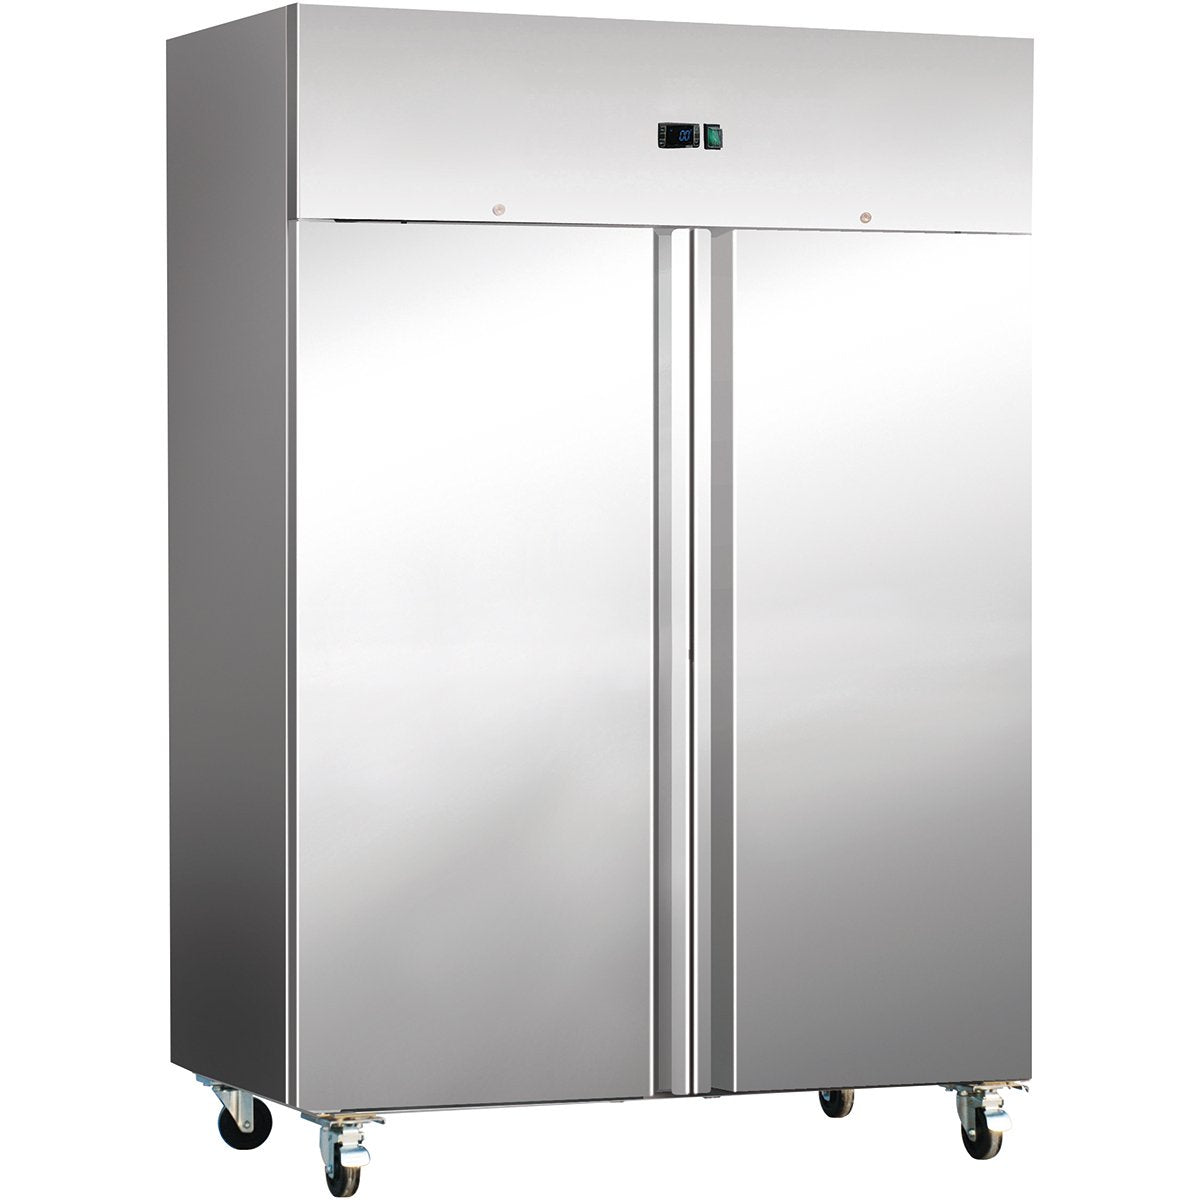 COMMERCIAL DOUBLE DOOR UPRIGHT FREEZER 1200LT FAN ASSISTED COOLING .Product Ref:00642.MODEL:GNH1200BTV.🚚 1-3 Days Delivery